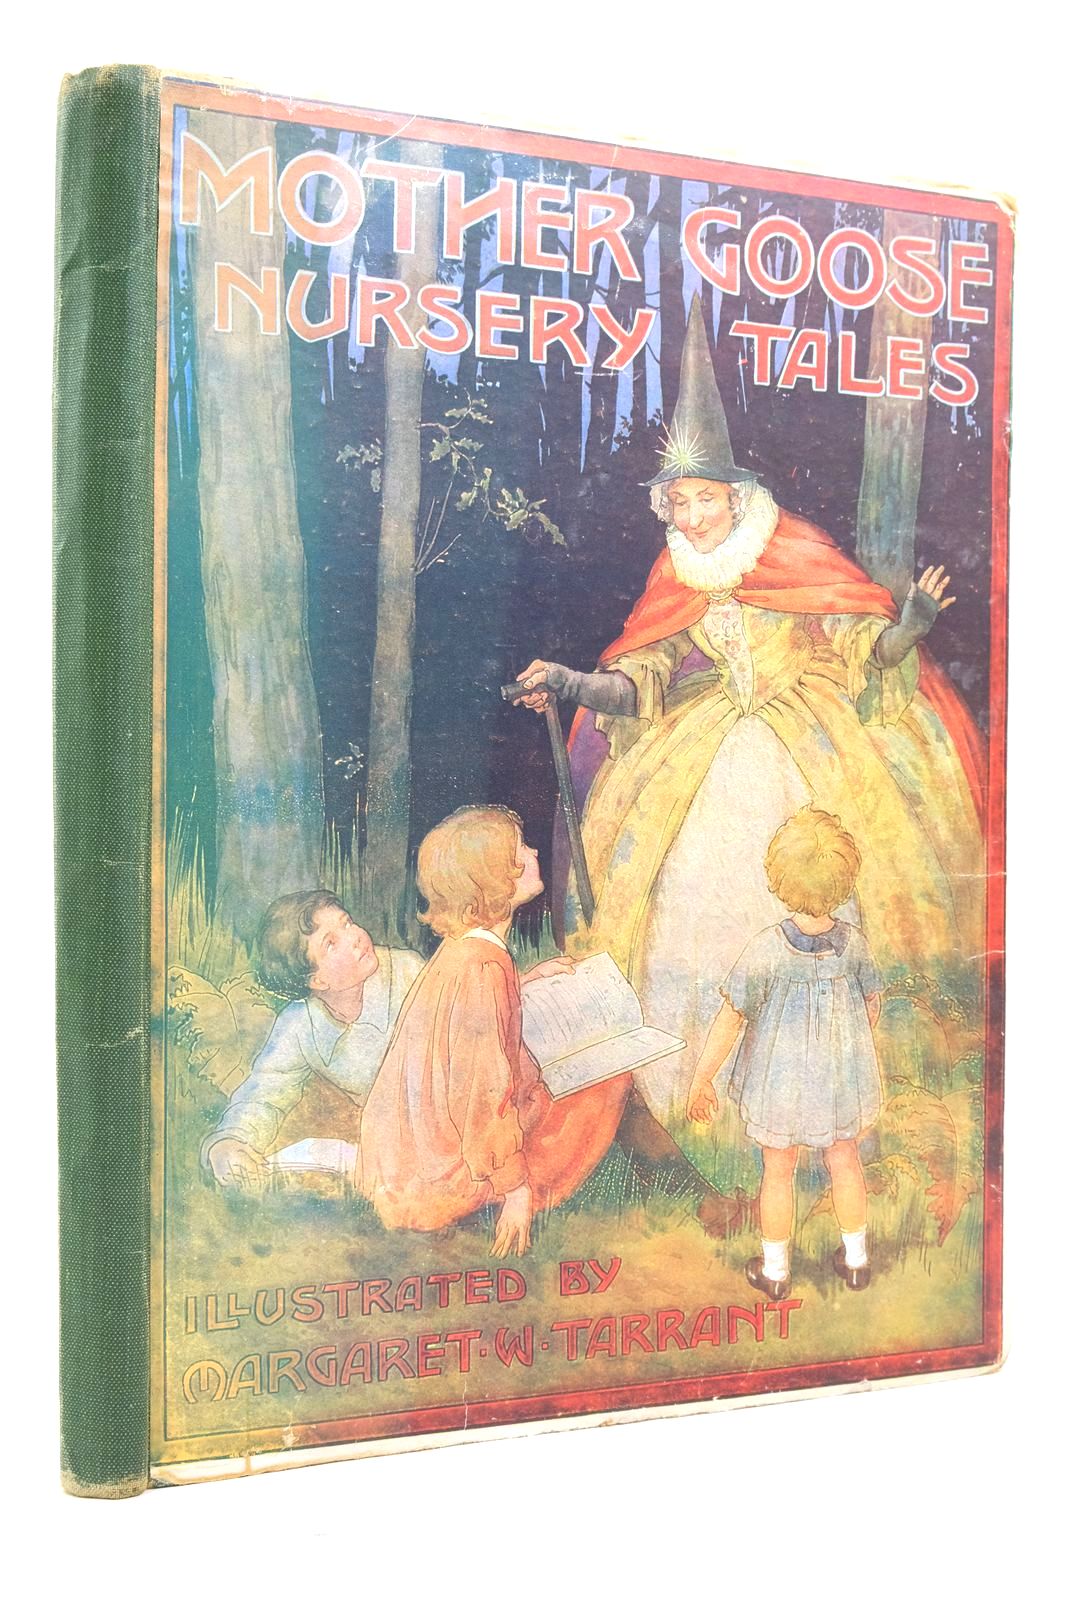 Photo of MOTHER GOOSE NURSERY TALES illustrated by Tarrant, Margaret published by J. Coker &amp; Co. Ltd. (STOCK CODE: 2137937)  for sale by Stella & Rose's Books